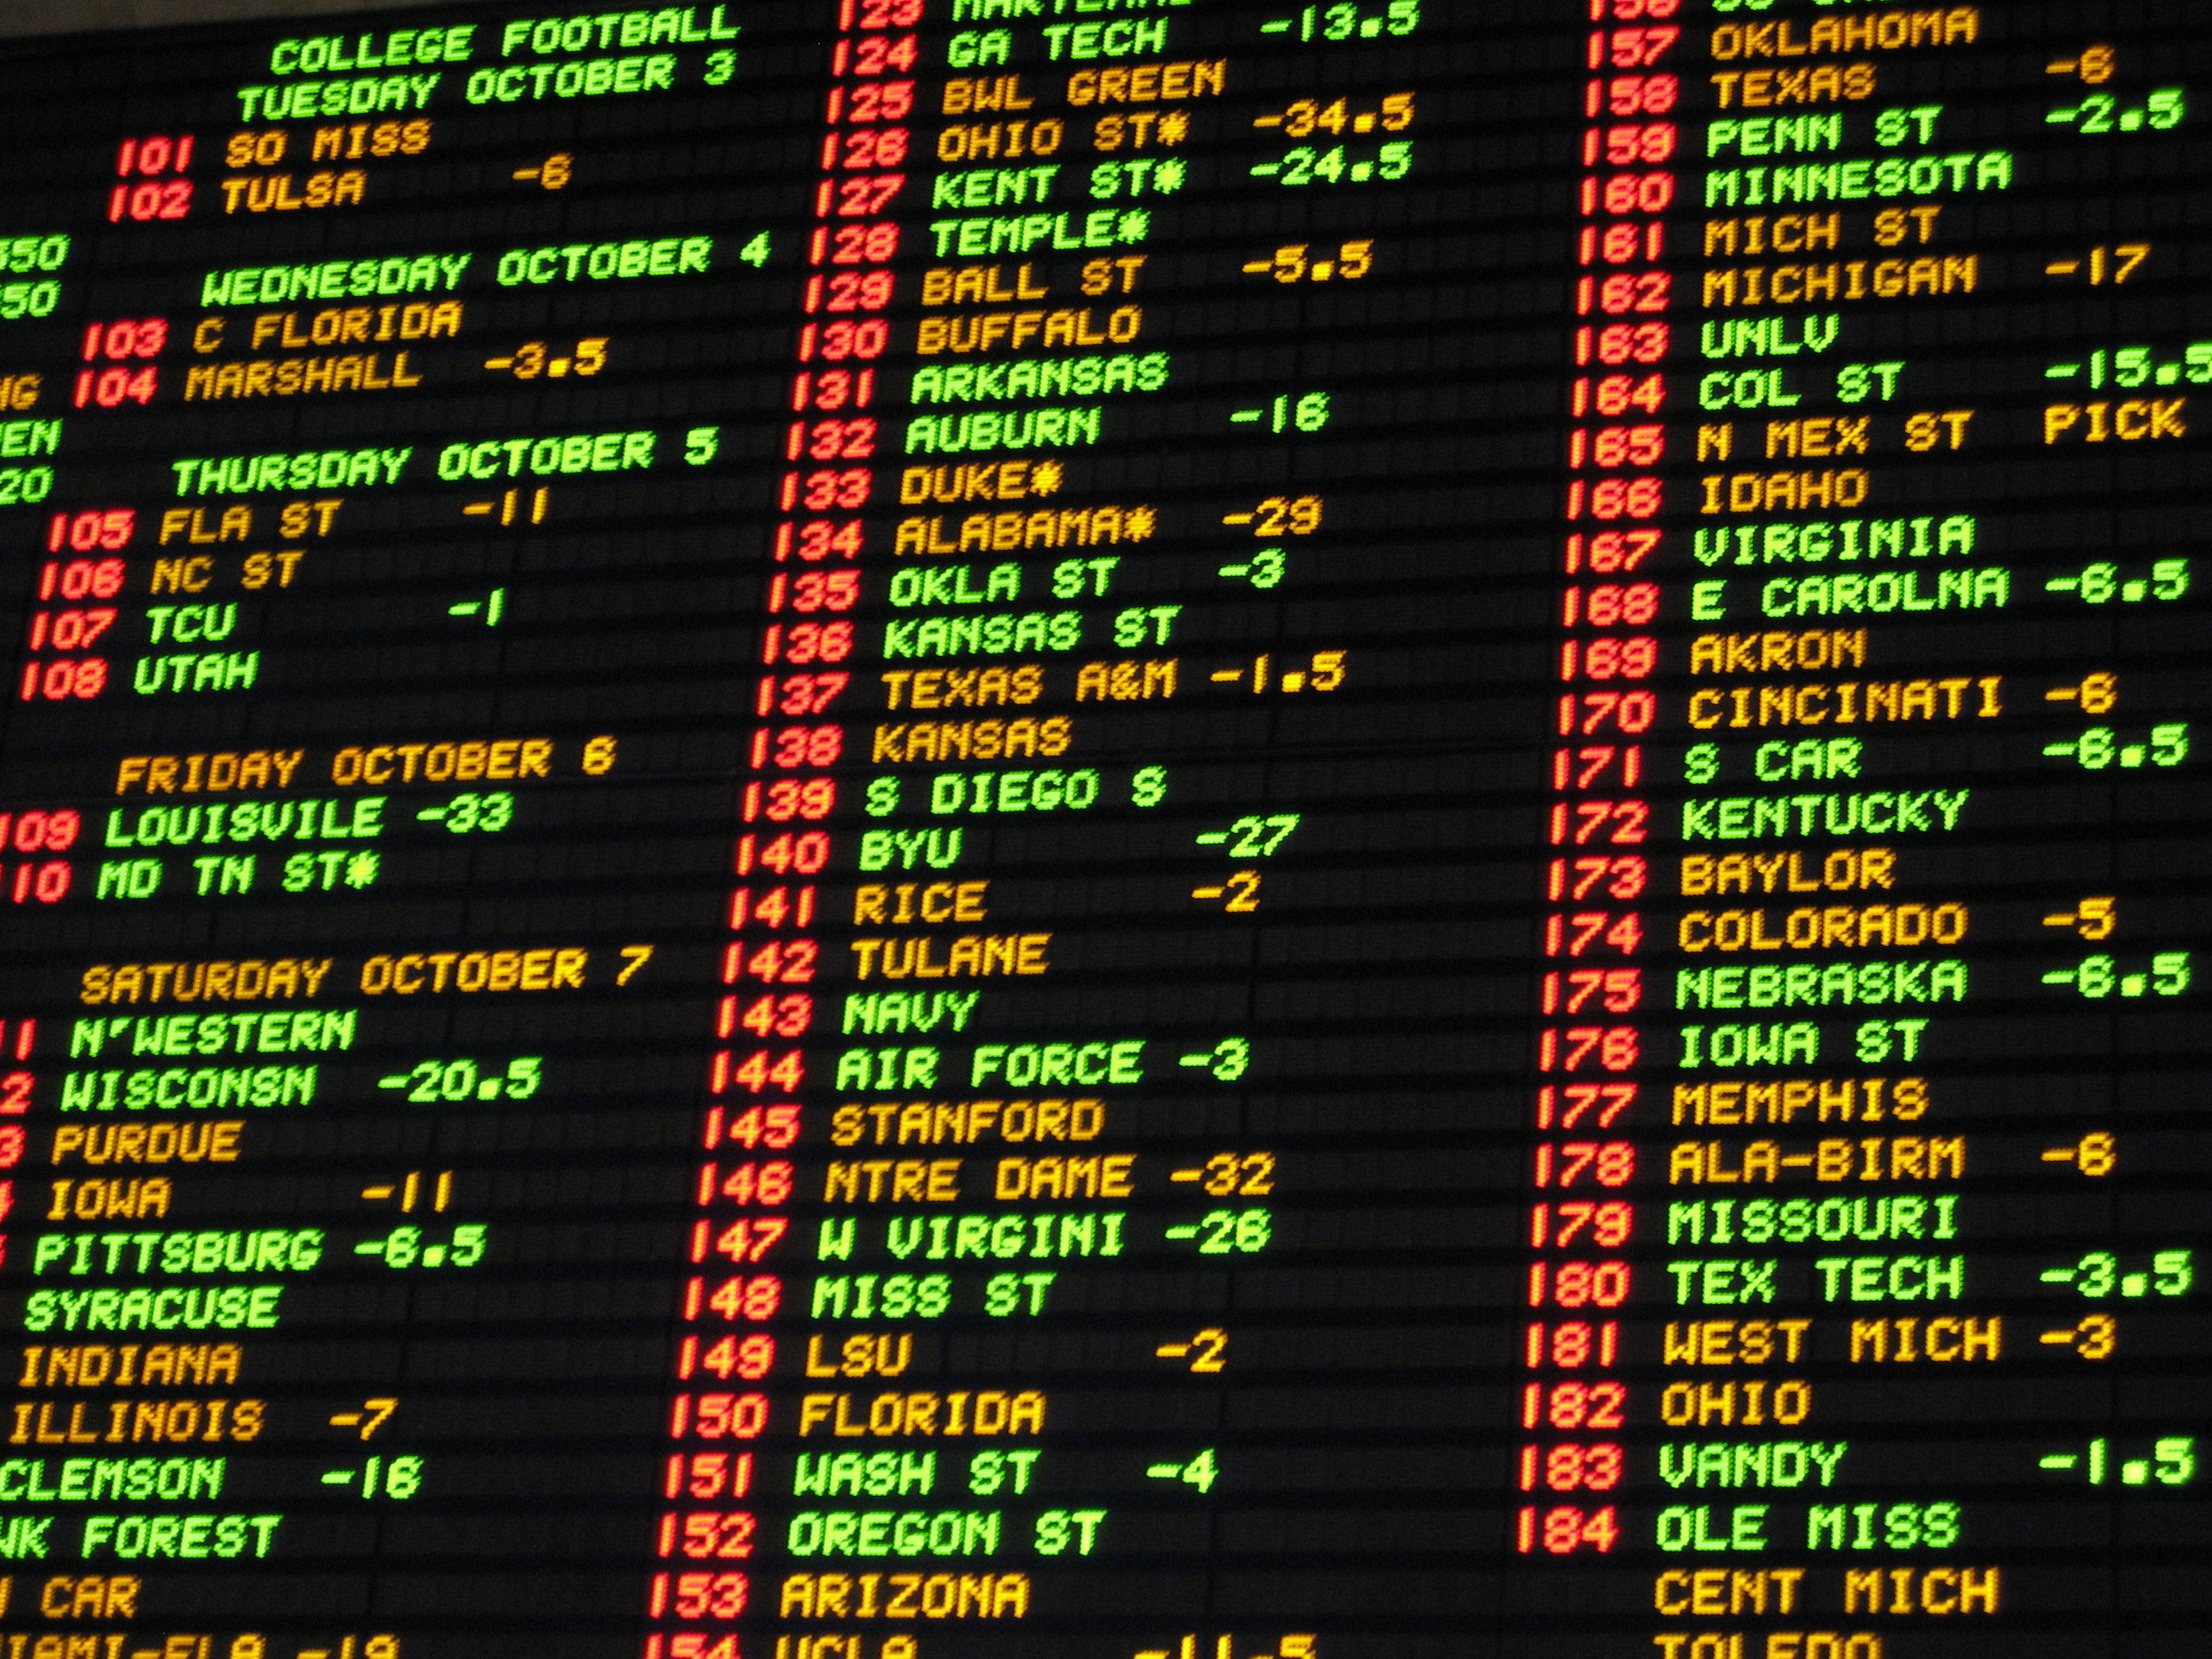 Photo of a football odds betting board at a Las Vegas casino.